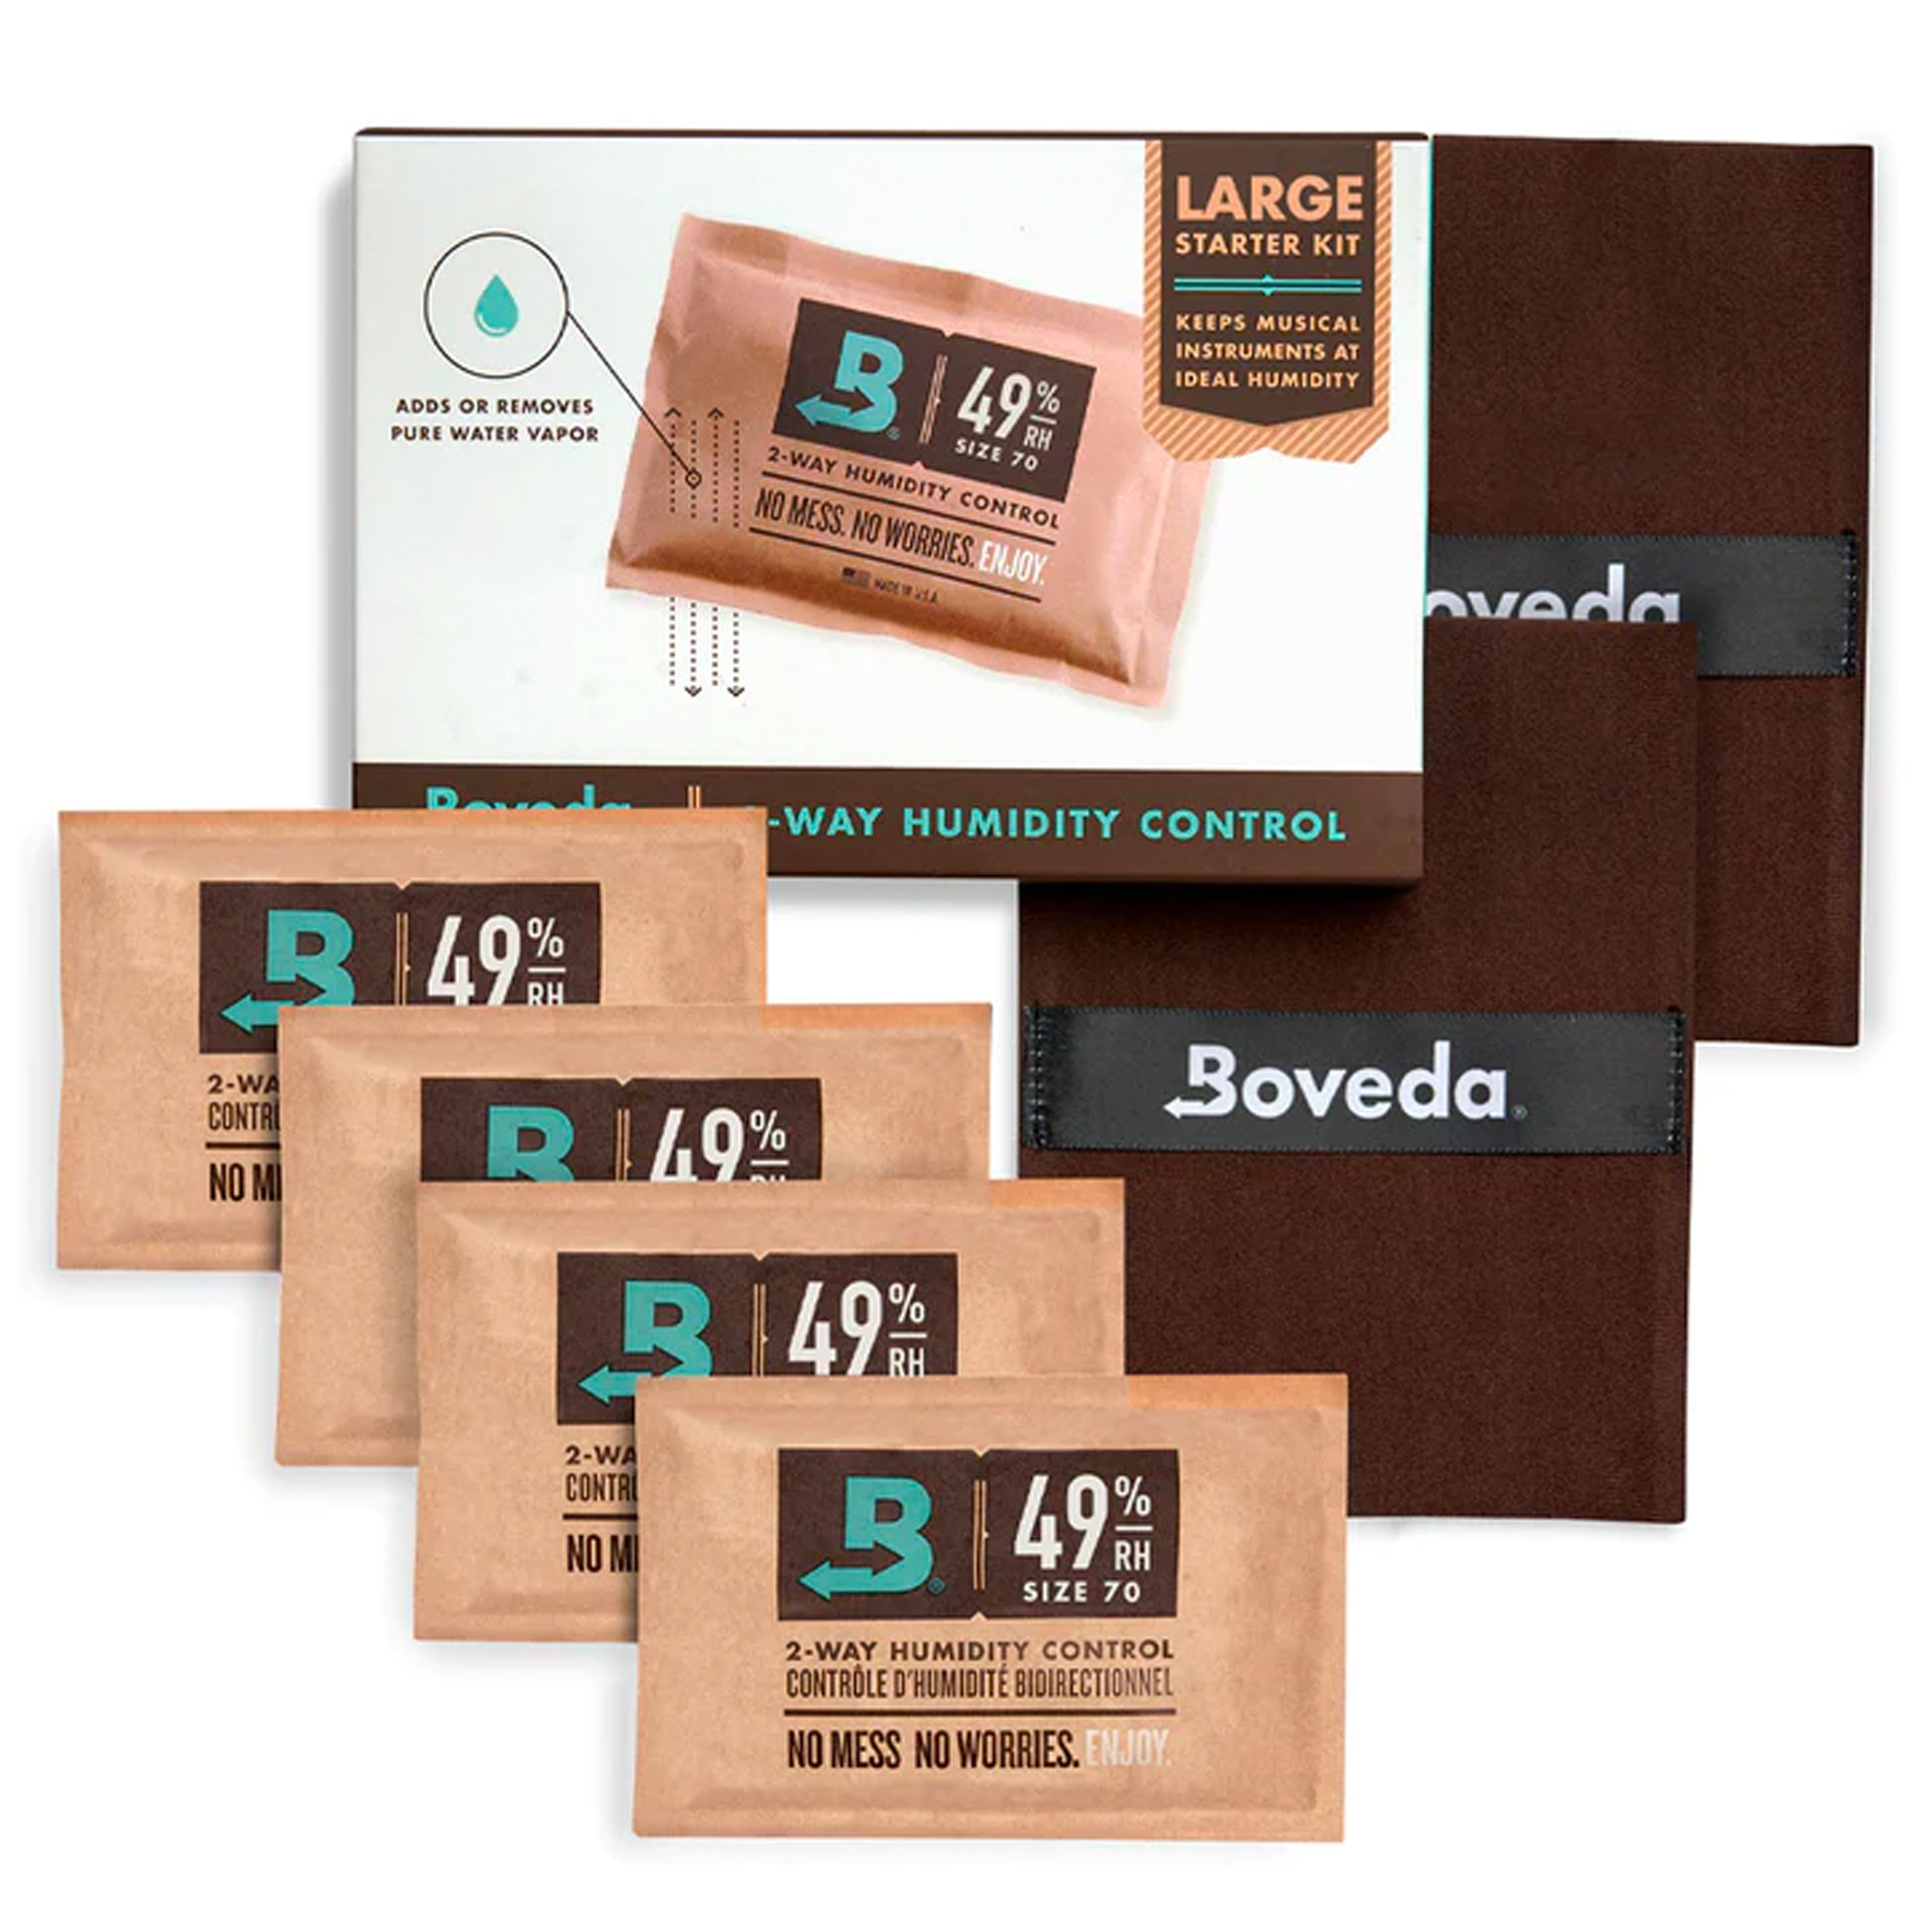 Boveda Humidification Starter Kit (Large) in action